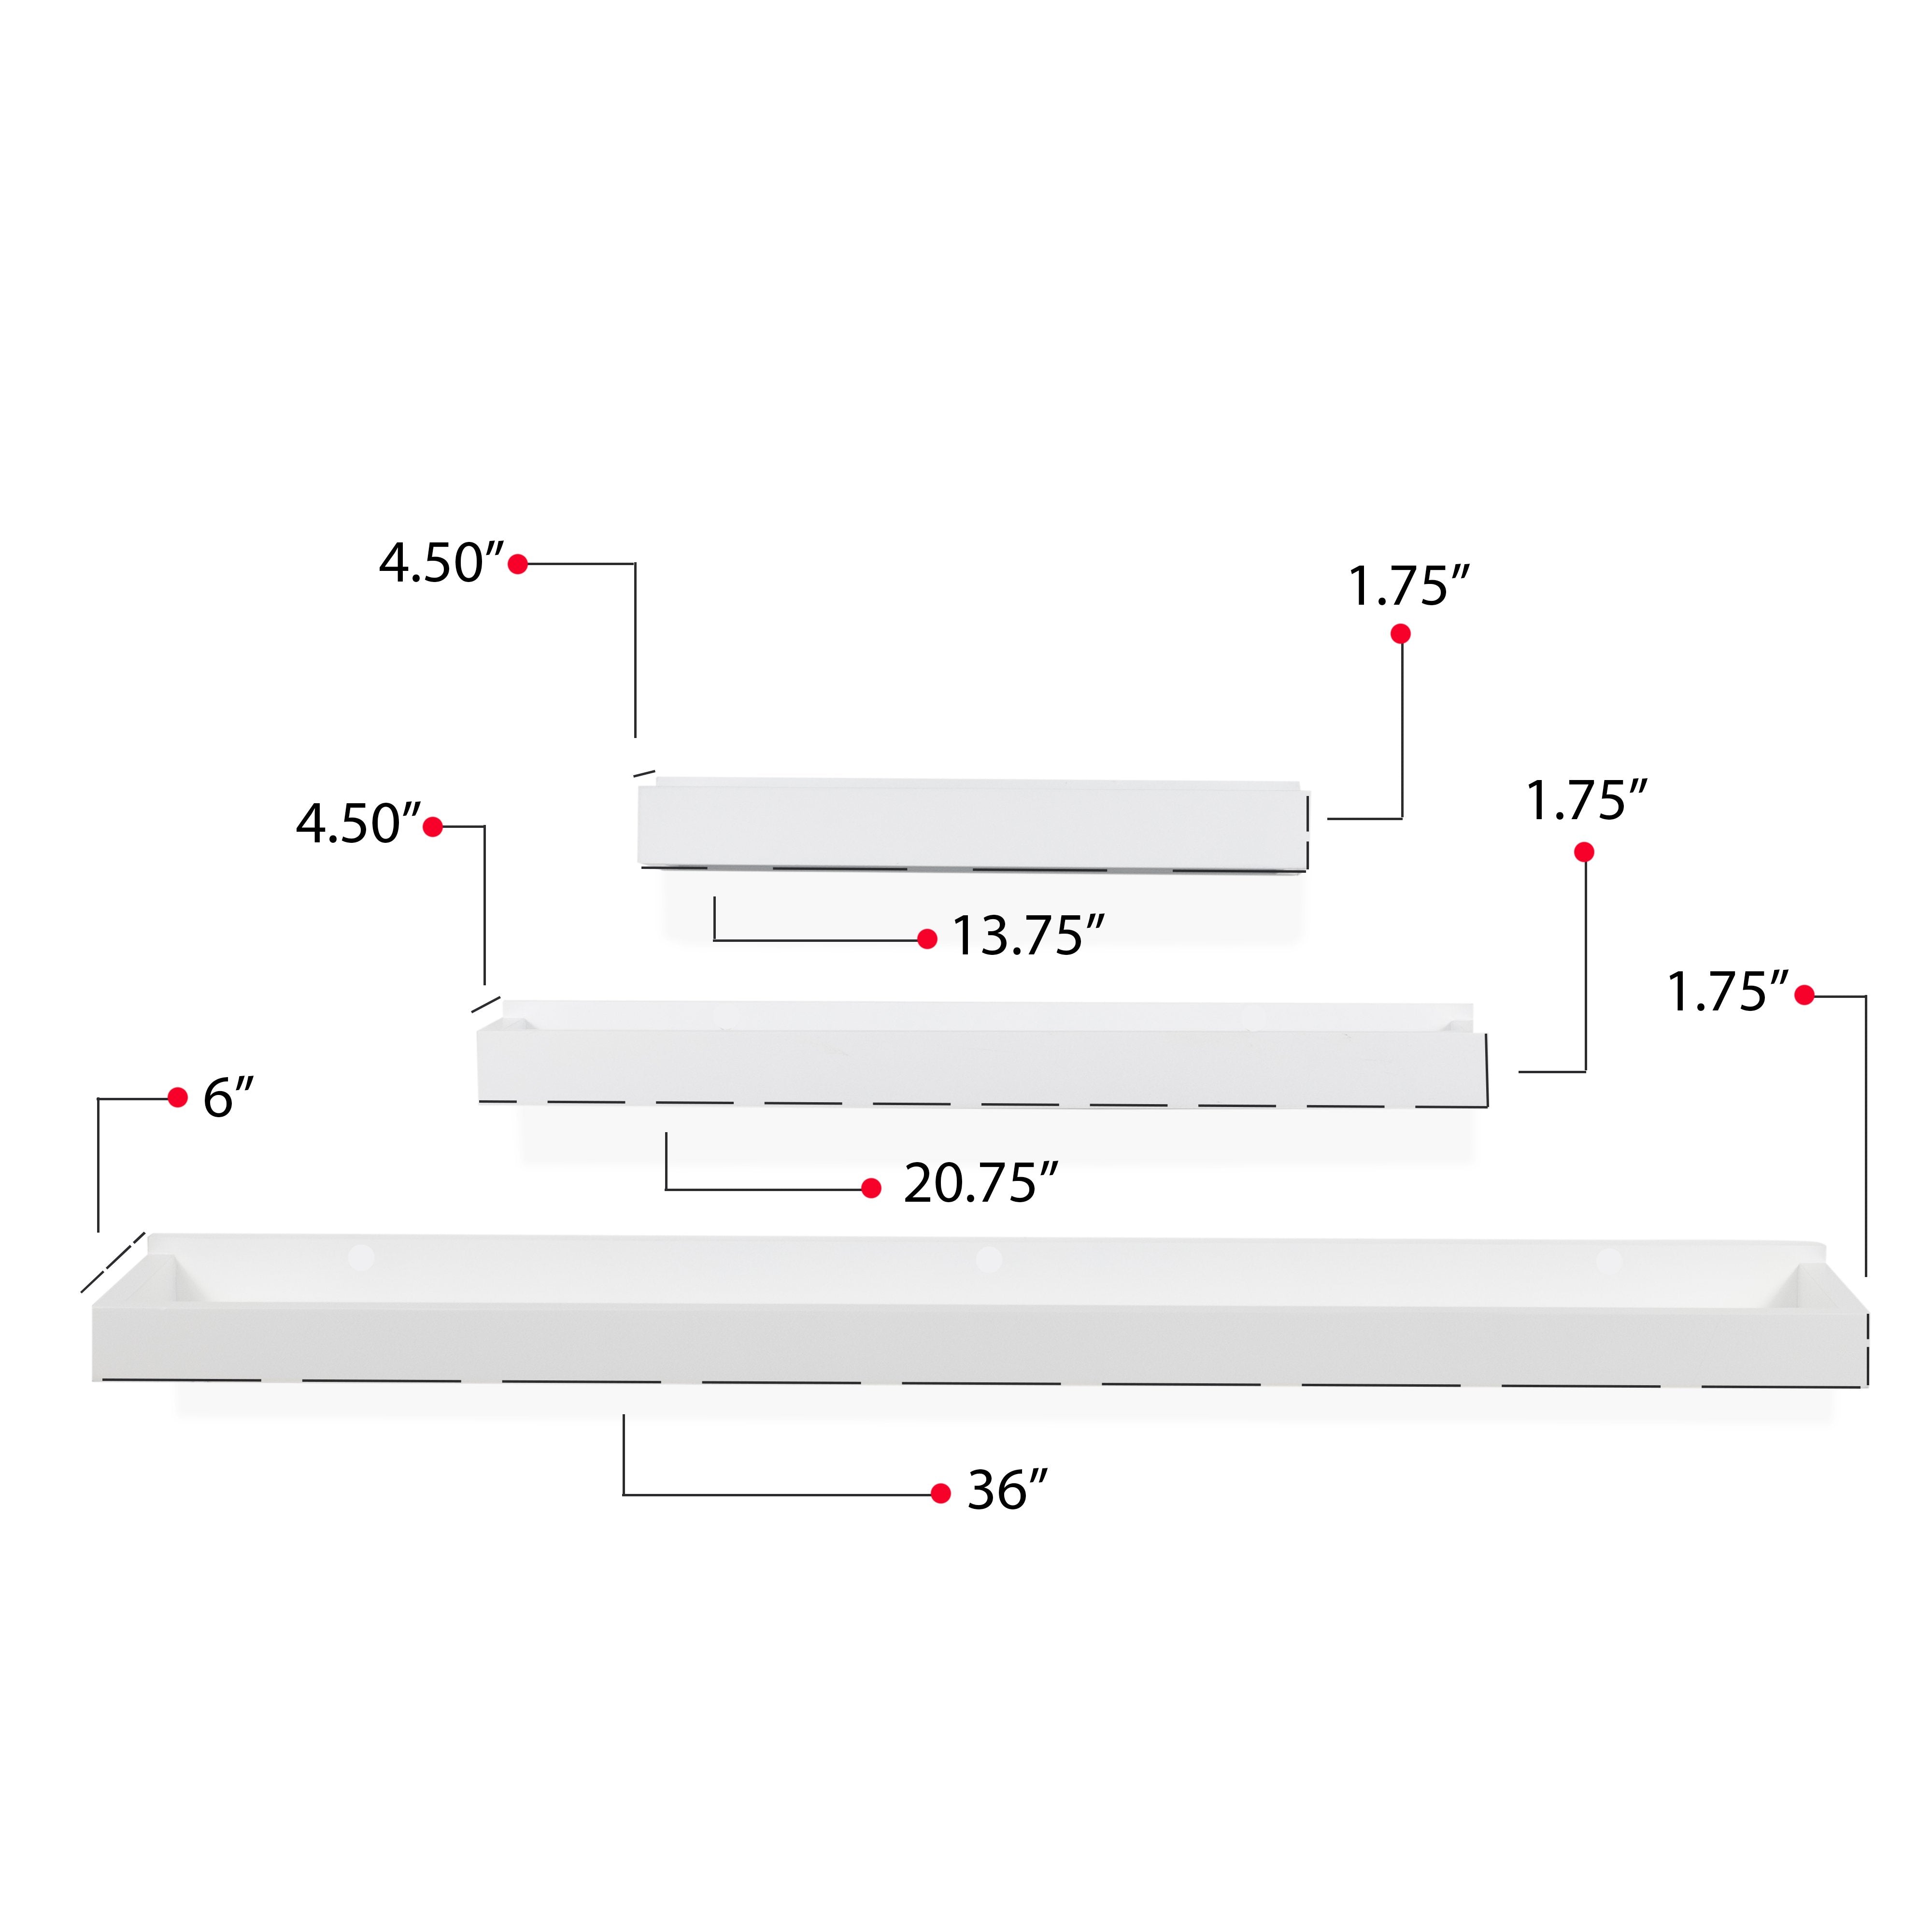 PHILLY Floating Shelves Wall Bookshelf and Picture Ledge for Bedroom Decor- Multisize - Set of 3 - White, Navy Blue, Gray, Walnut - Wallniture